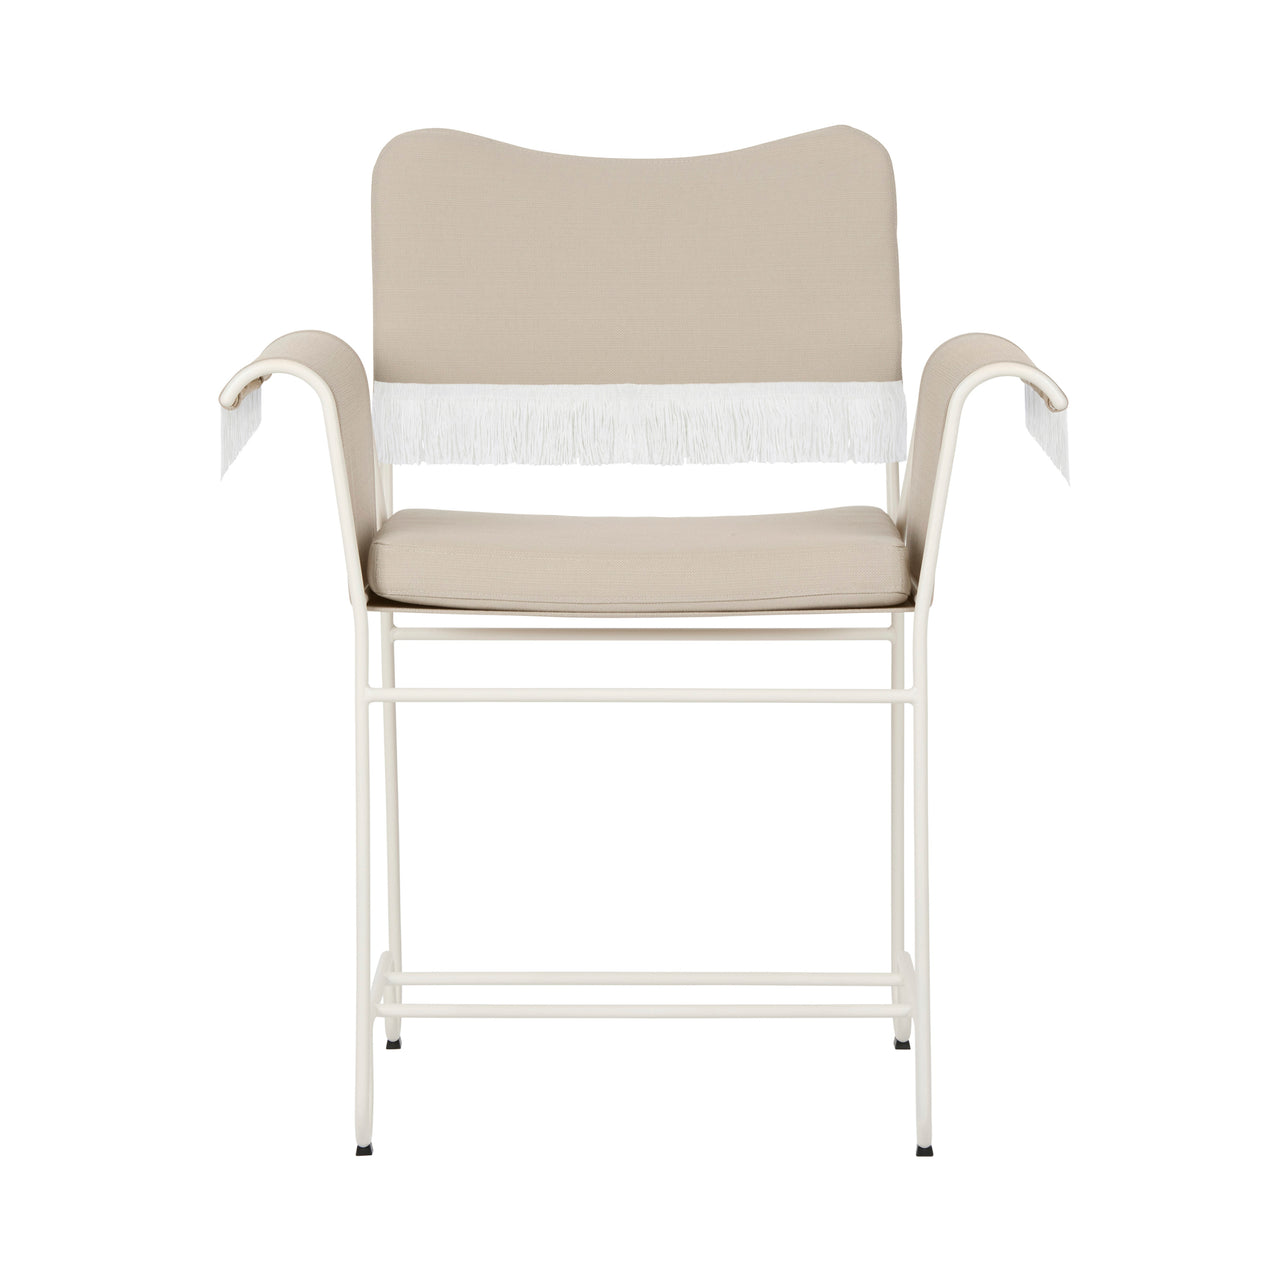 Tropique Dining Chair: Outdoor + With Fringes + White Semi Matt + Leslie 12